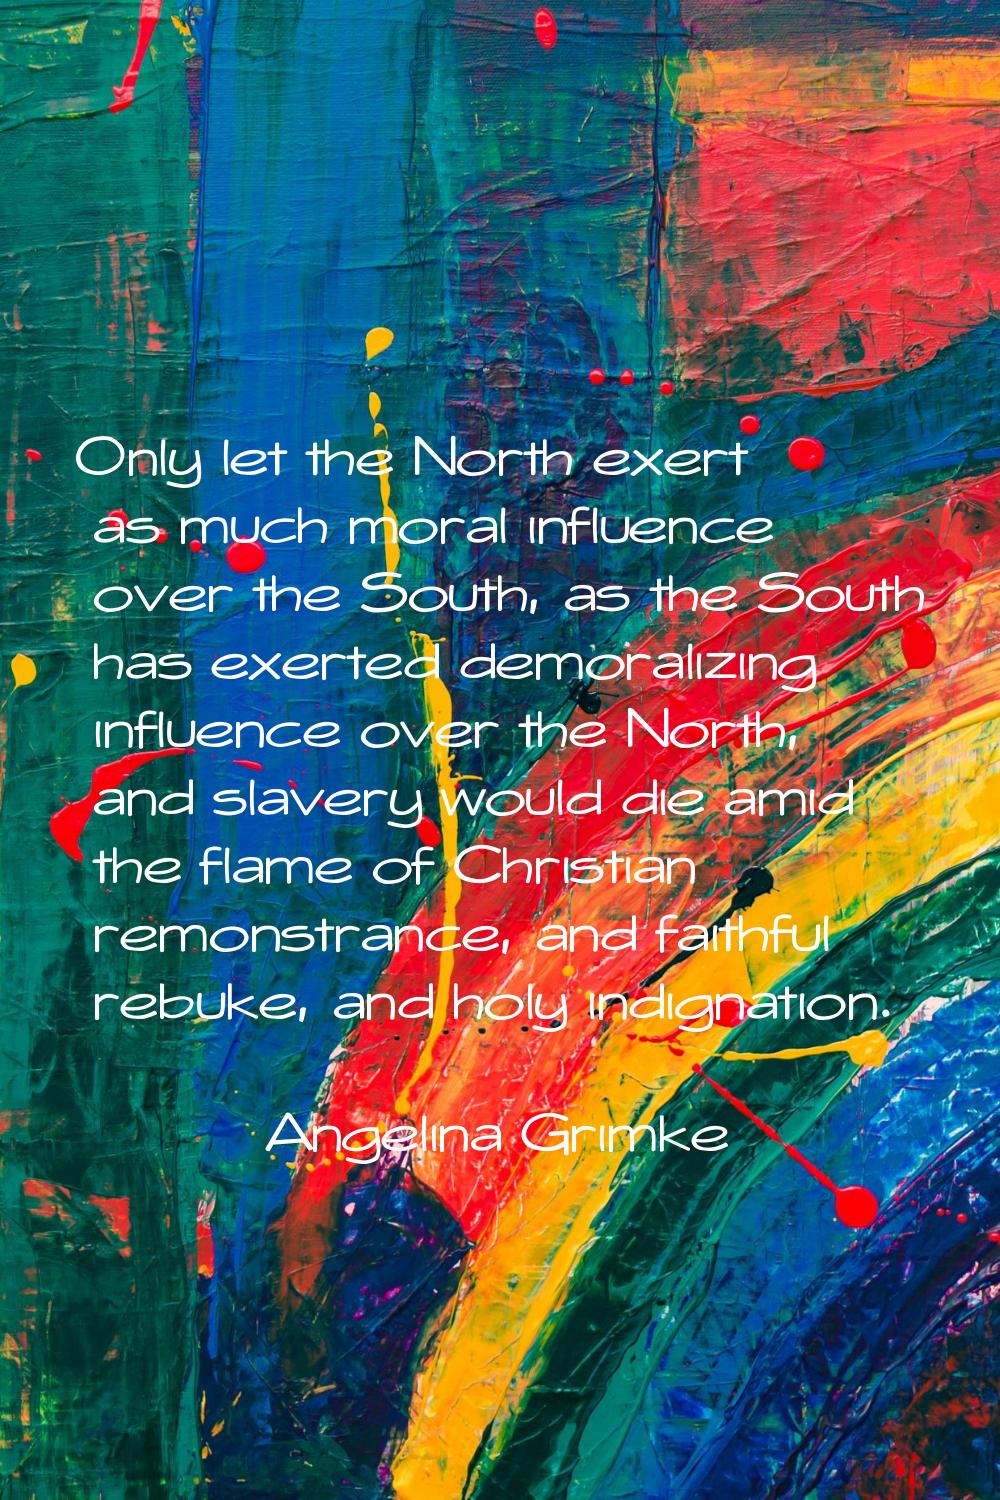 Only let the North exert as much moral influence over the South, as the South has exerted demoraliz